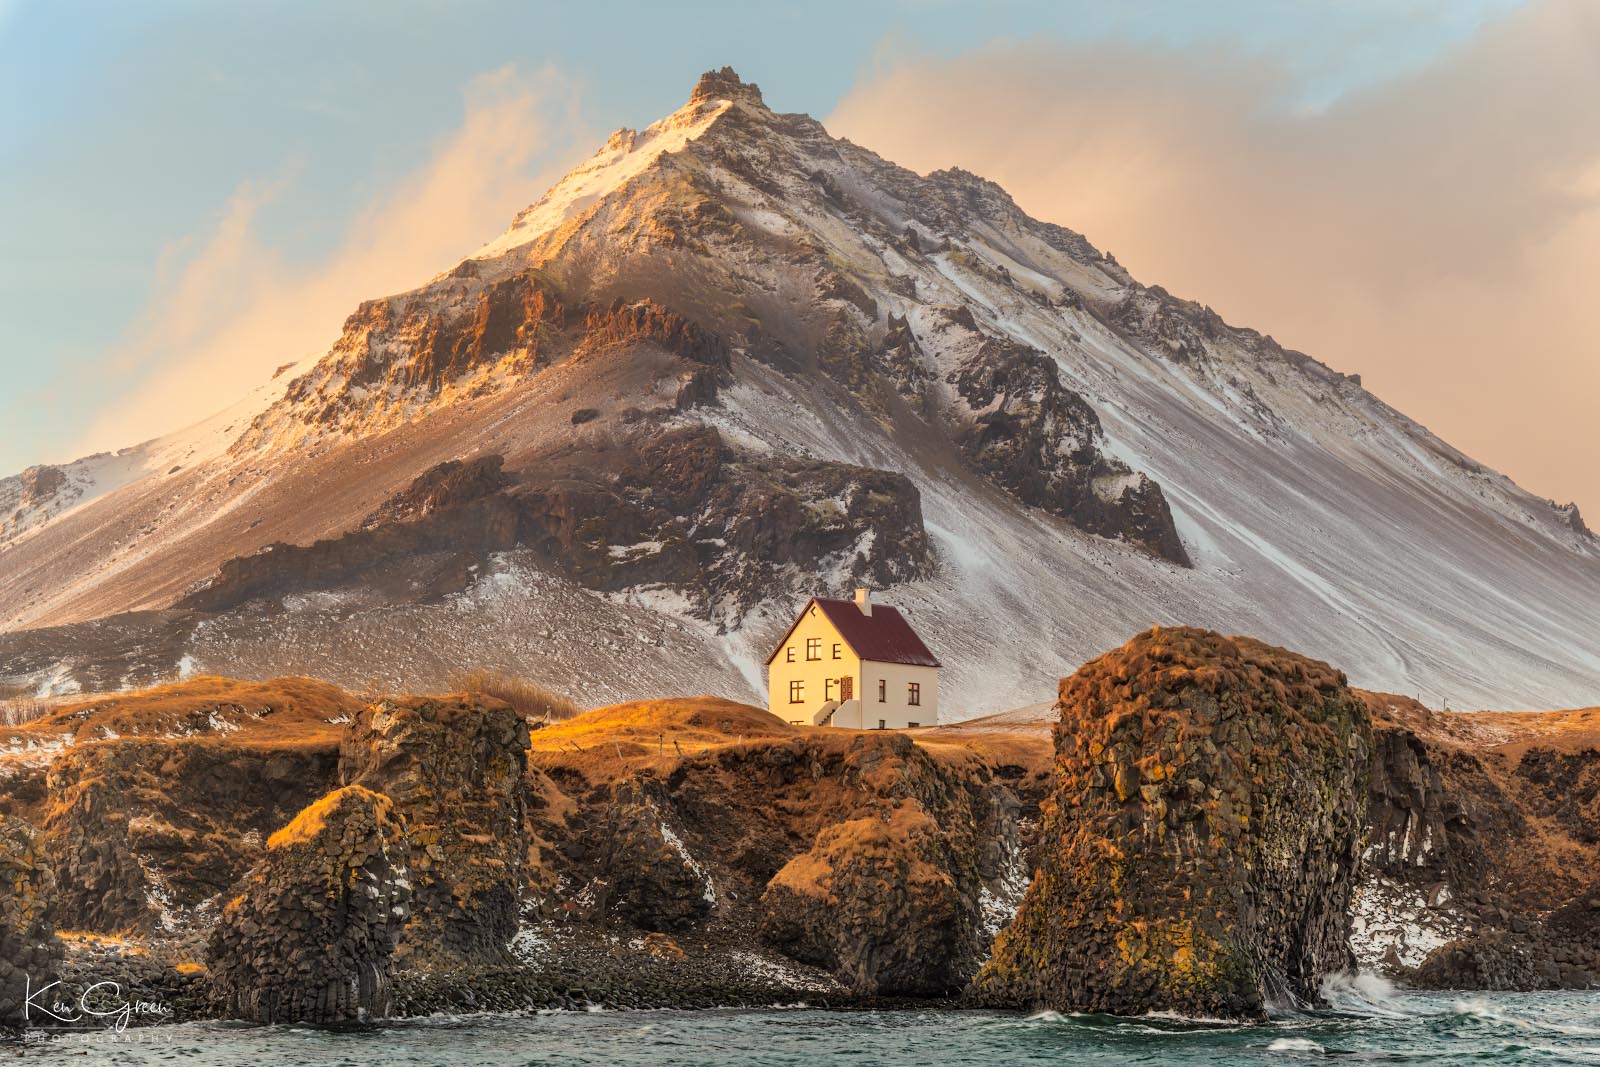 Mount Stepafell and farmhouse at Port Arnastapi on the Snaefellsnes peninsula of Iceland.